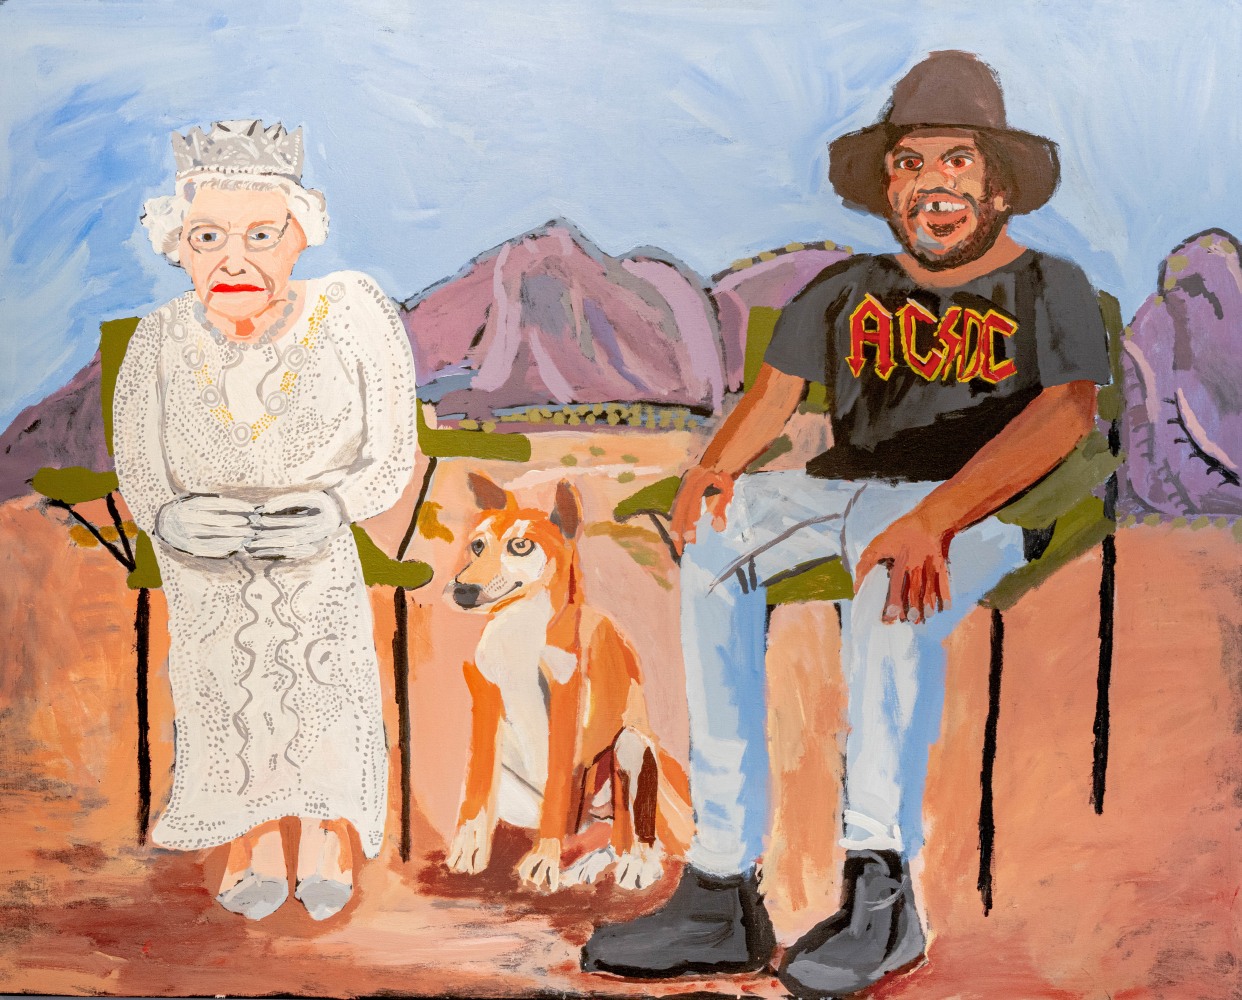 Vincent Namatjira
Elizabeth and Vincent (on Country), 2021
Acrylic on linen
48 x 60 inches